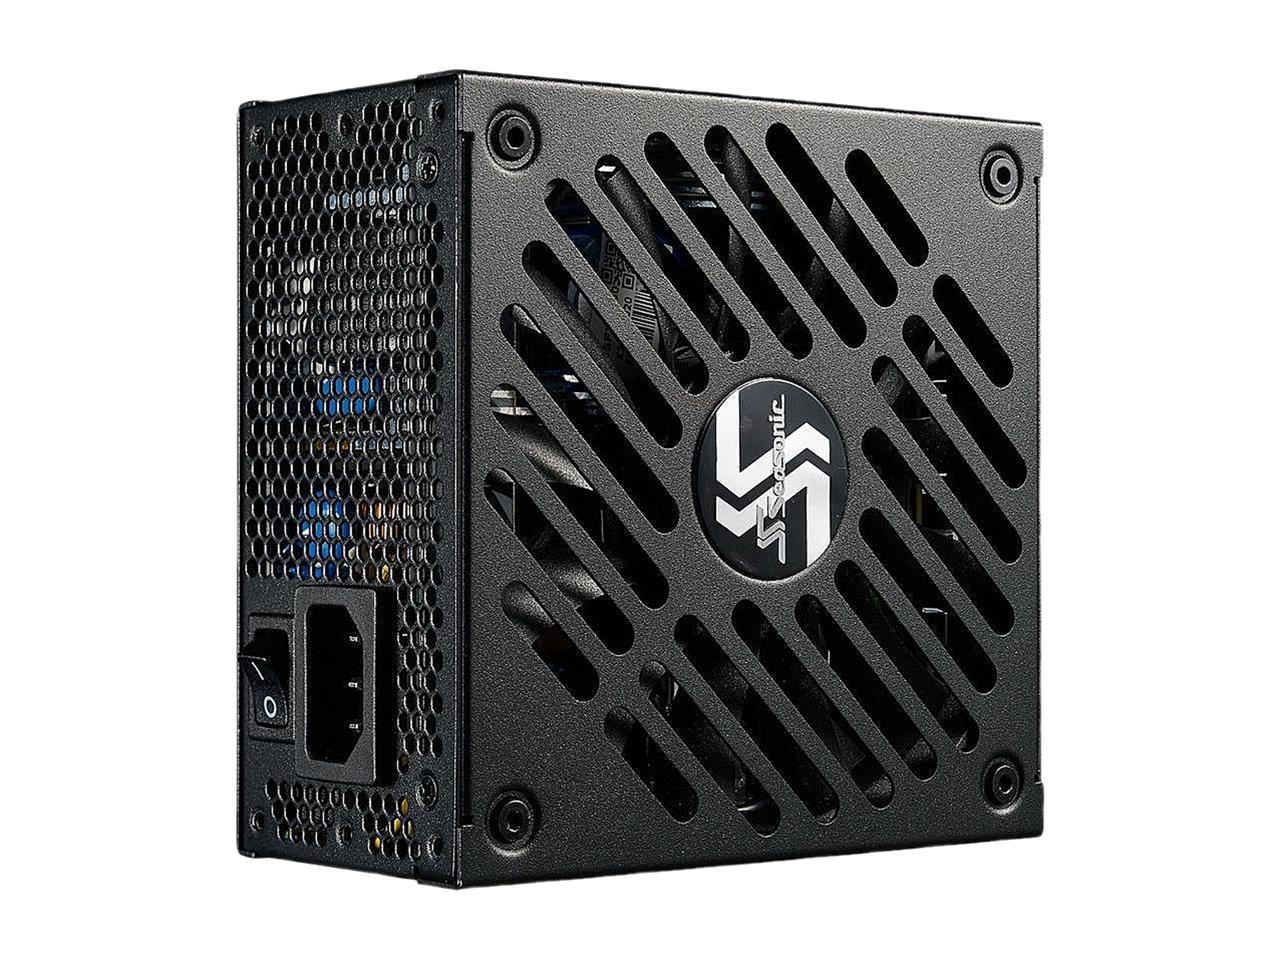 Seasonic FOCUS SGX-500, 500W 80+ Gold, Full-Modular, SFX-L Form Factor, Compact Size, Fan Control in Fanless, Silent, and Cooling Mode, 10 Year Warranty, Power Supply, SSR-500SGX.